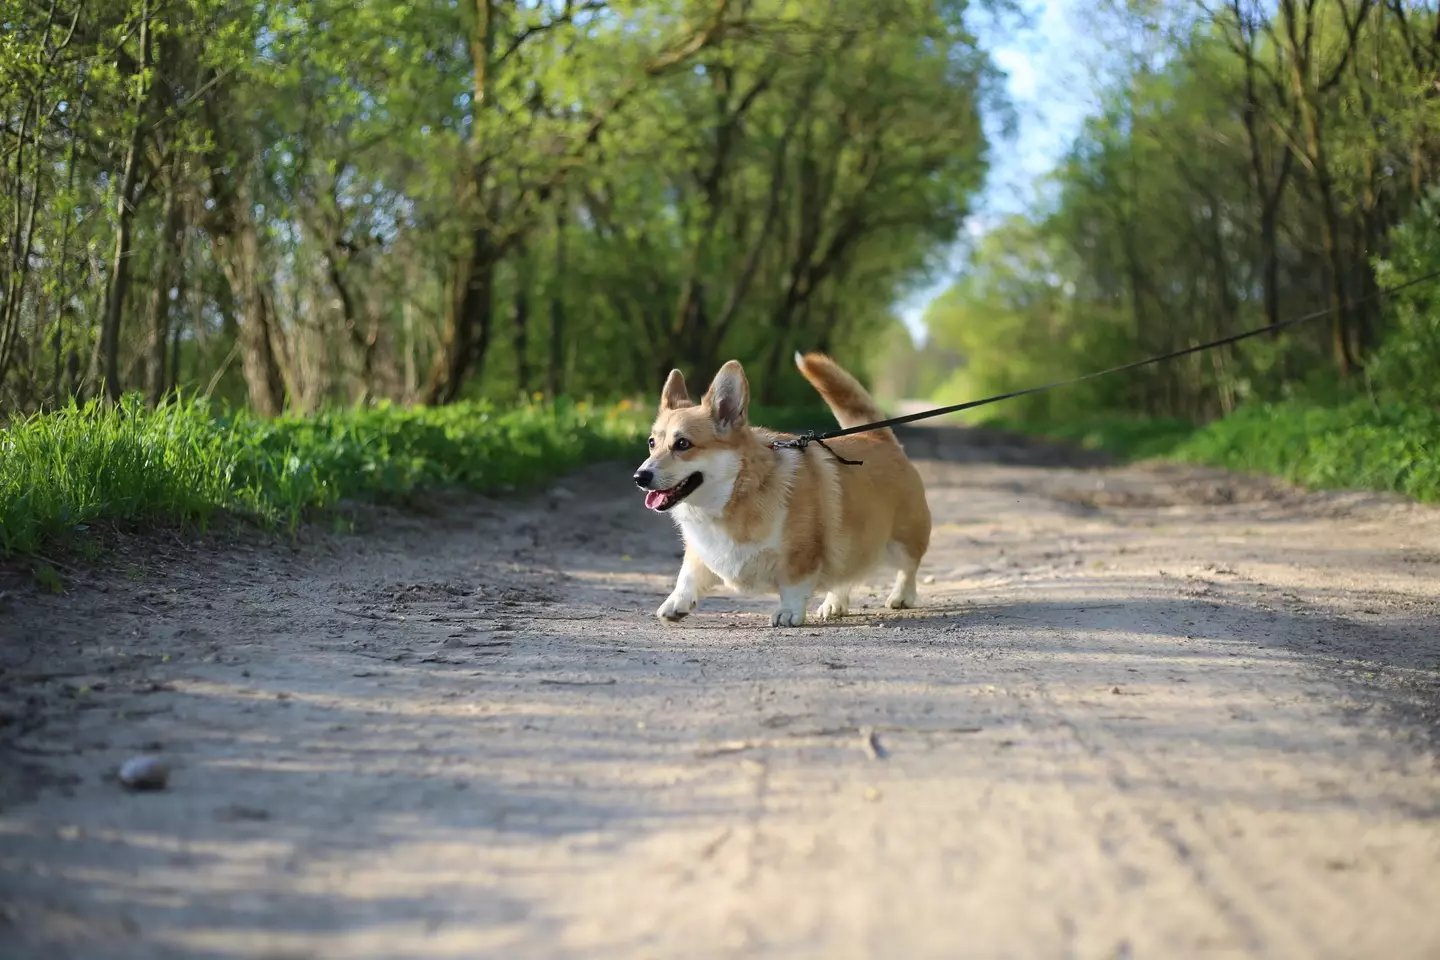 A corgie being walked.